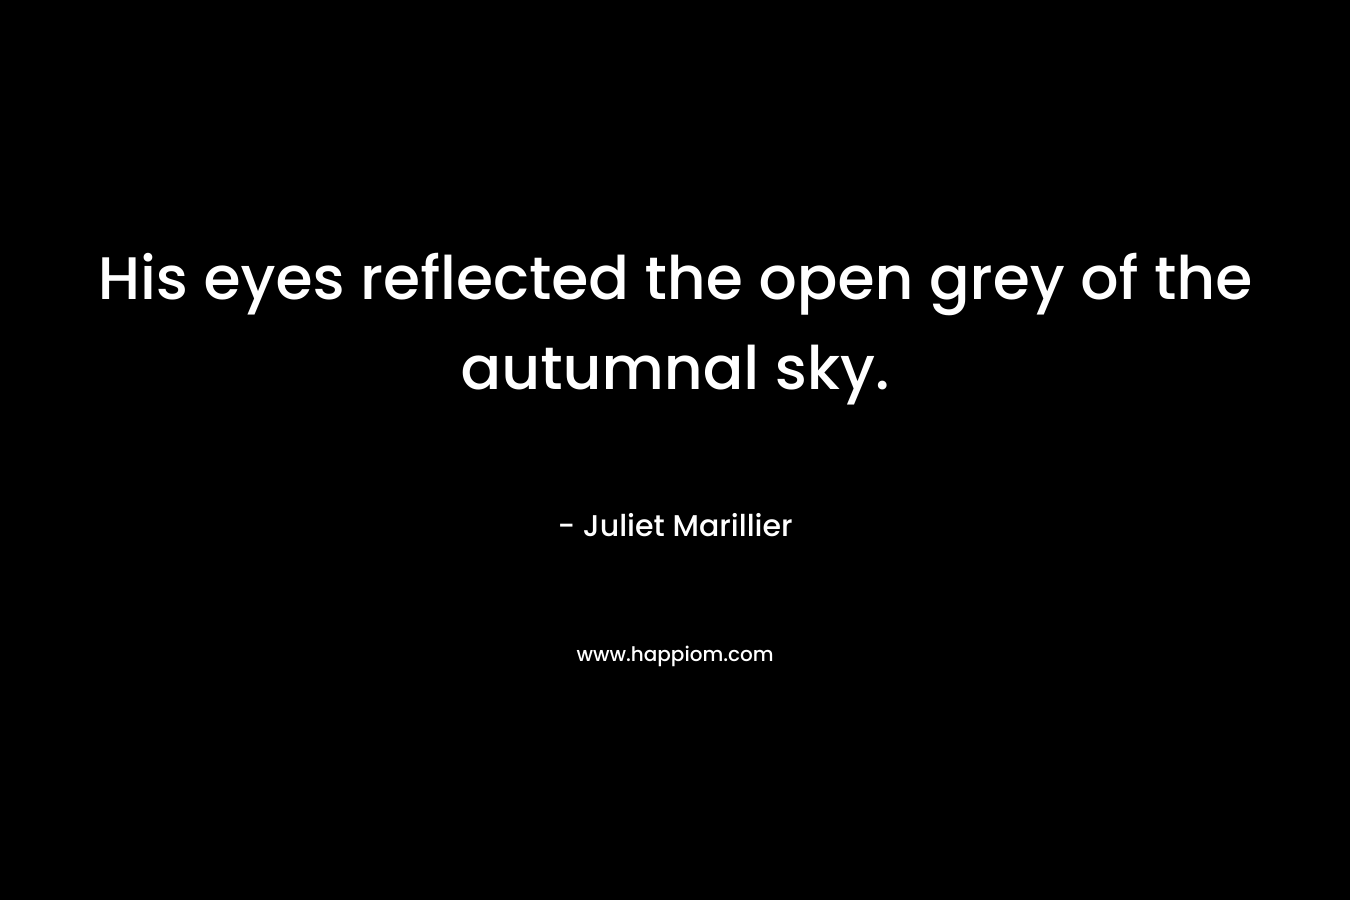 His eyes reflected the open grey of the autumnal sky. – Juliet Marillier